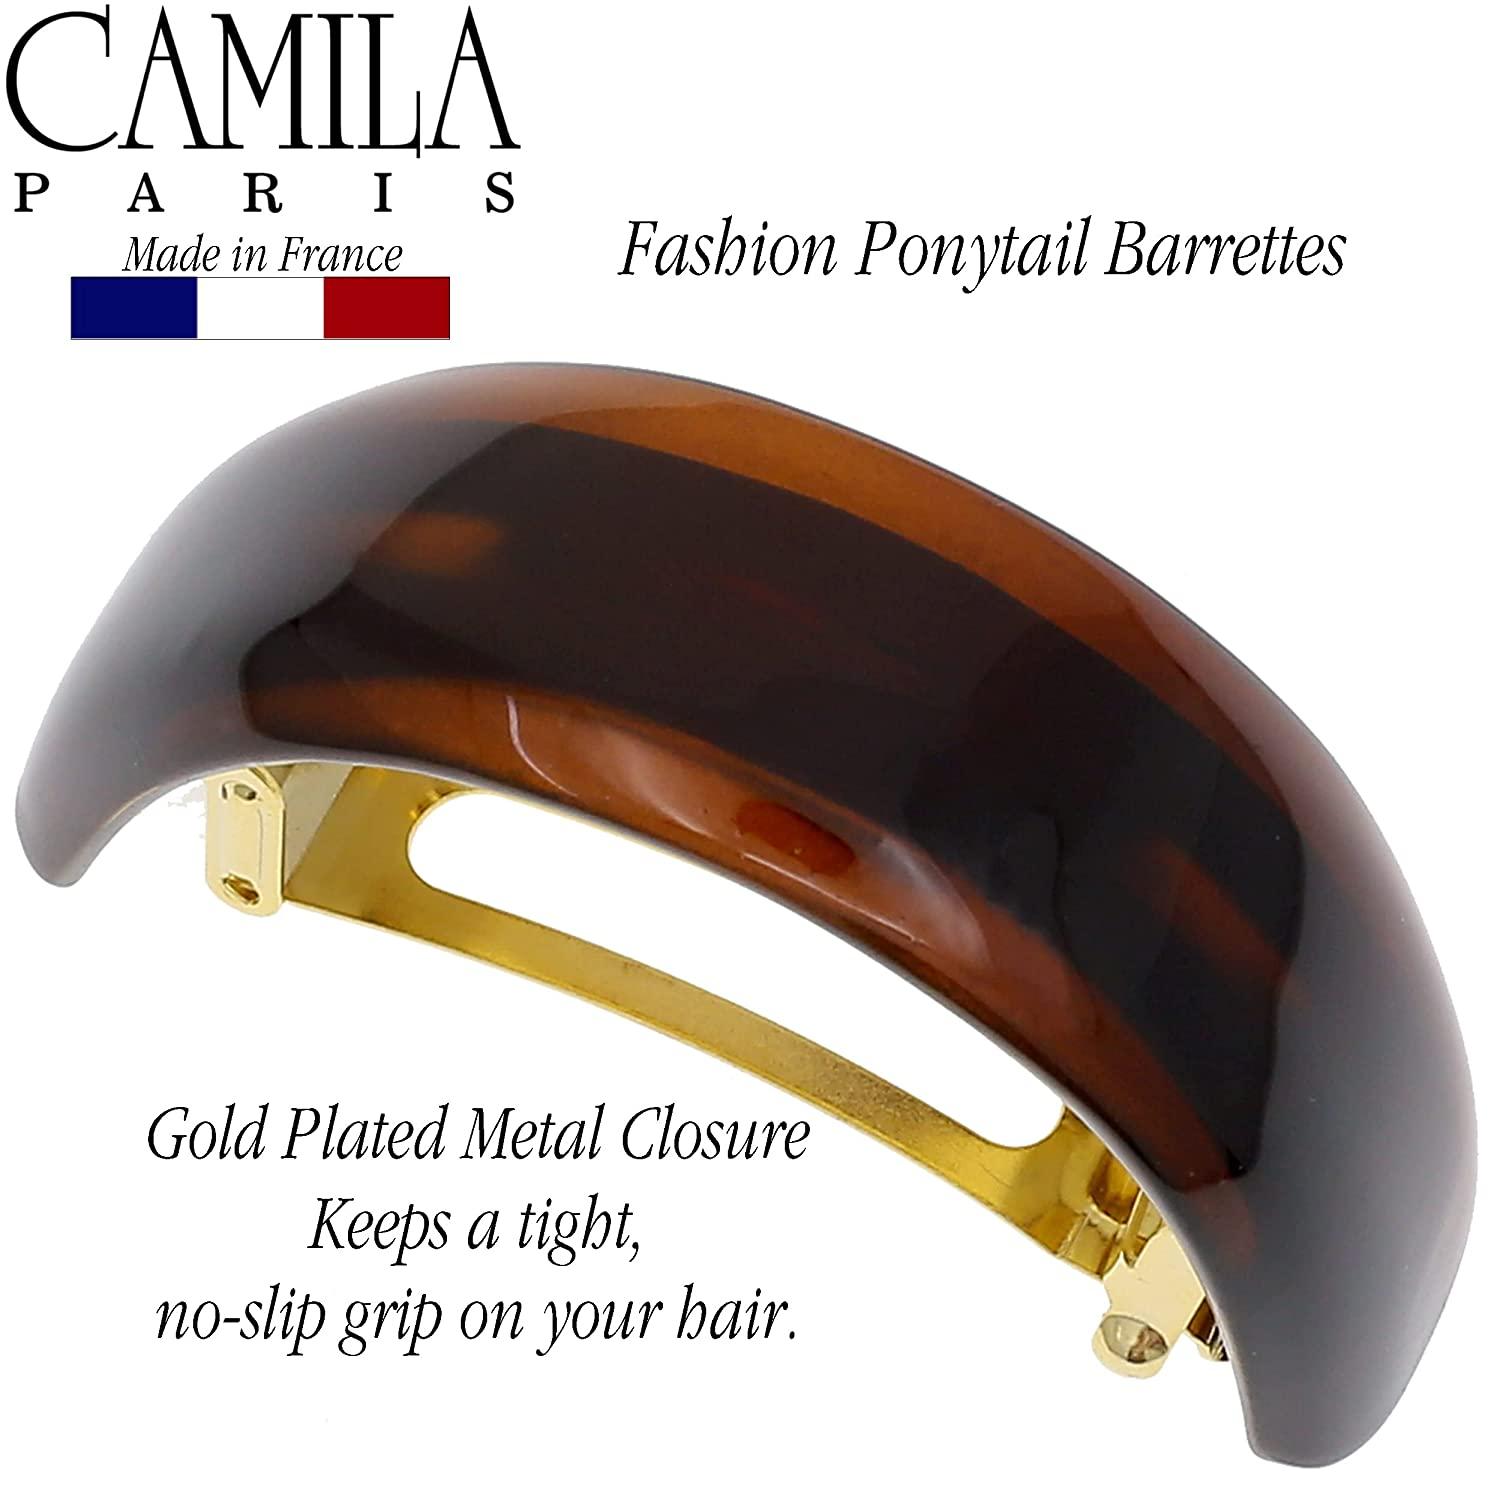 Camila Paris AD12 2.5 in. Tortoise Shell Barrette - Pack of 4